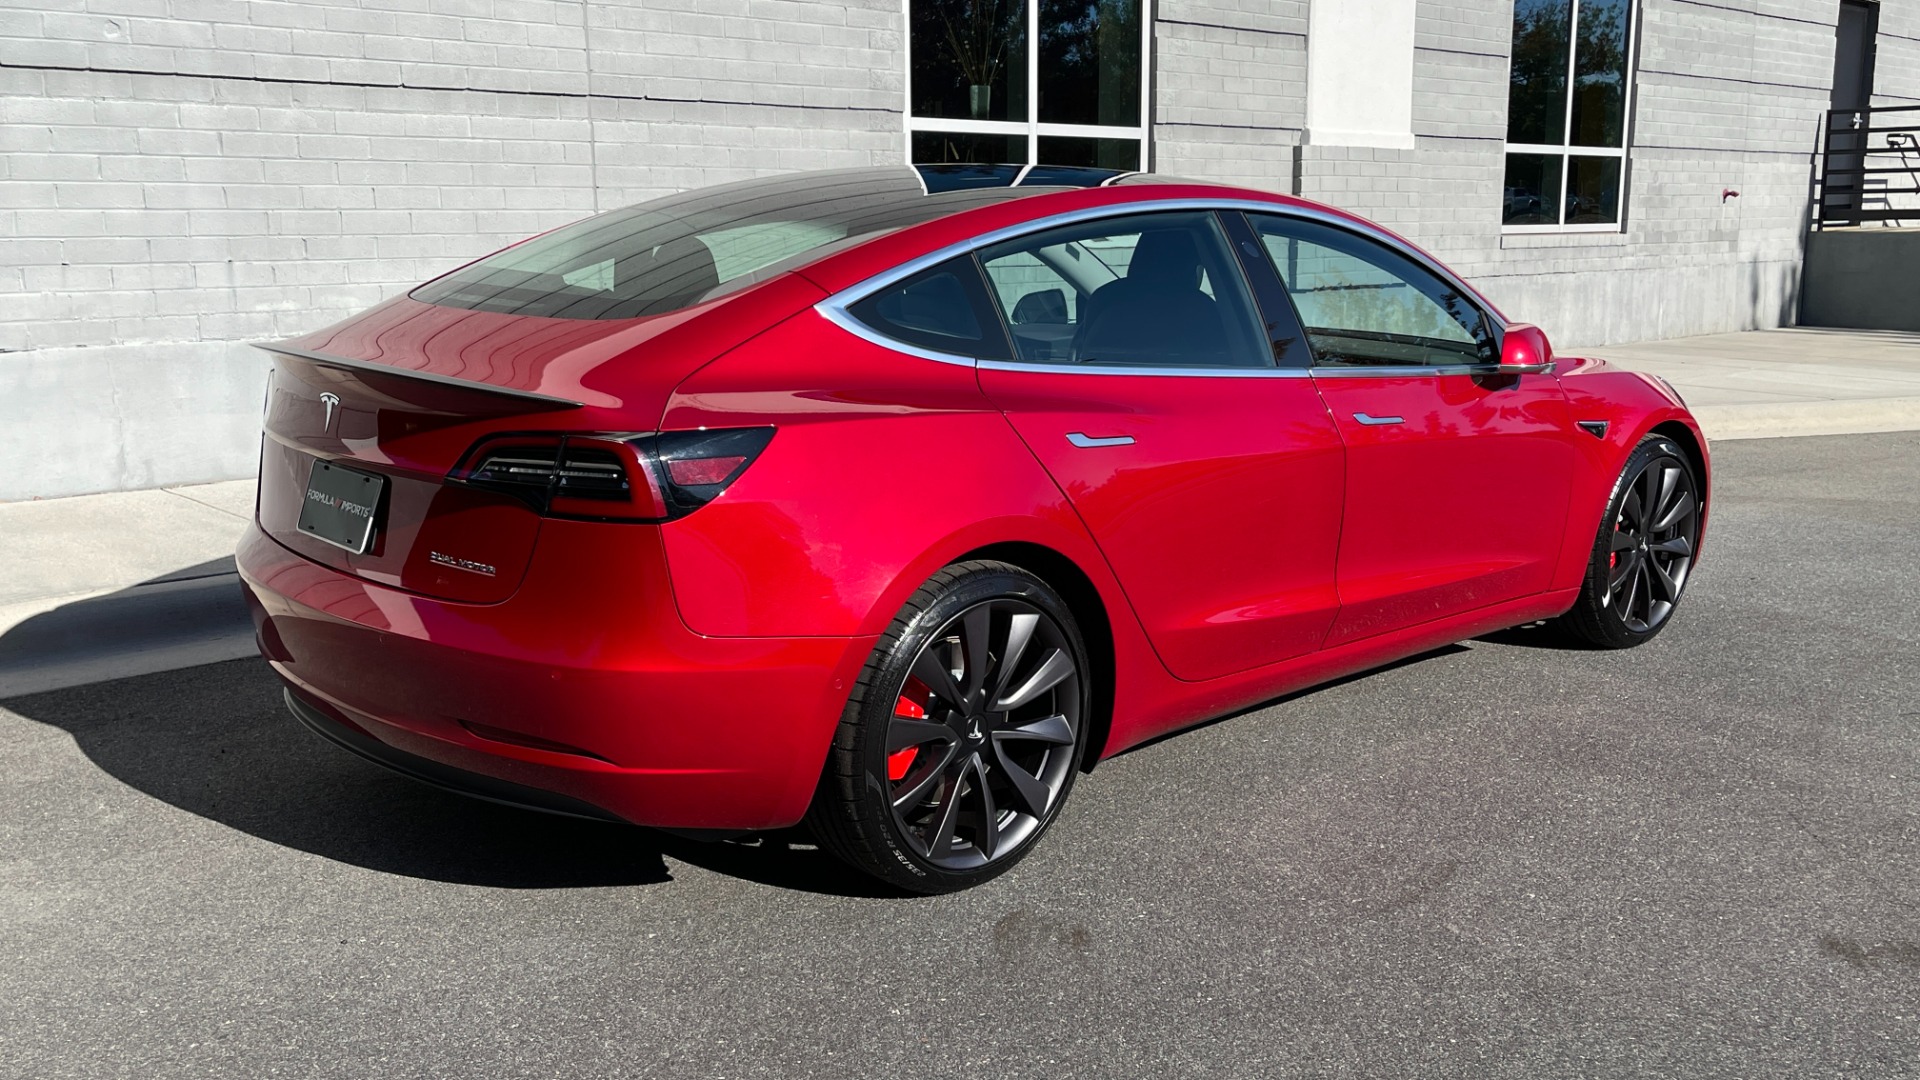 Used 2020 Tesla Model 3 PERFORMANCE / 20IN WHEELS / PERFORMANCE BRAKES / CARBON FIBER TRIM for sale $43,995 at Formula Imports in Charlotte NC 28227 5